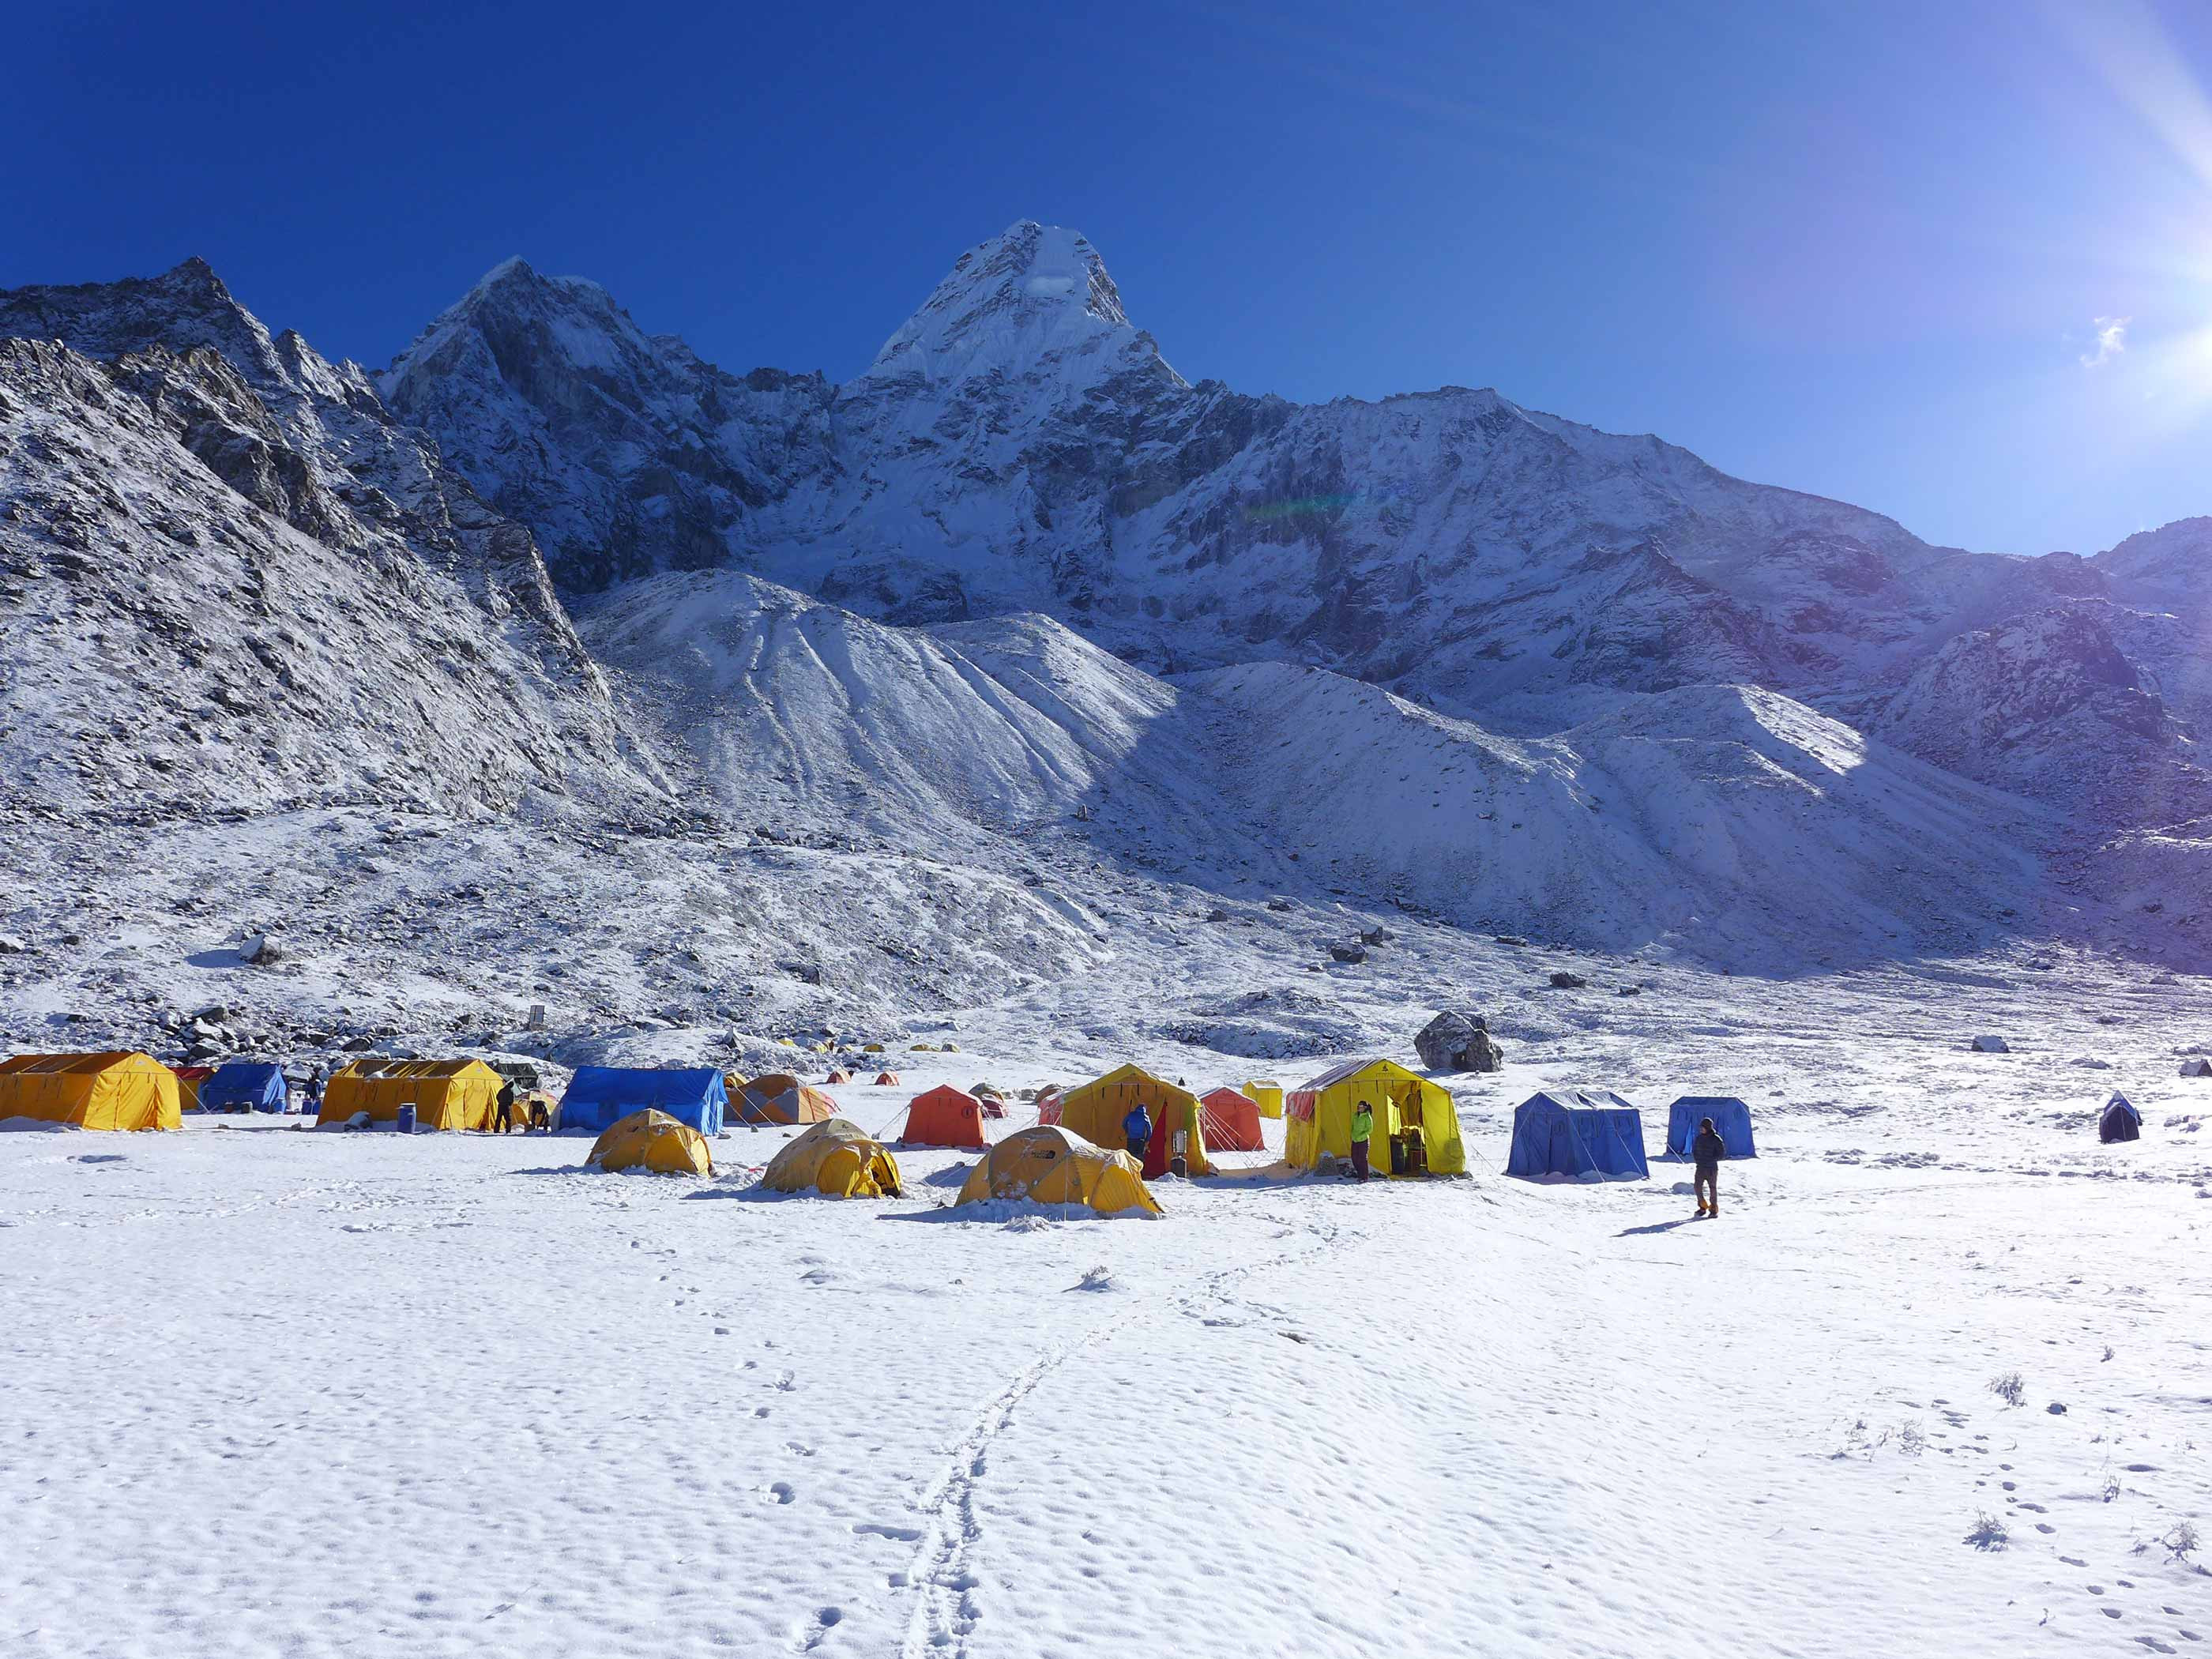 camp-site-at-snow-day-Amadablam-base-camp